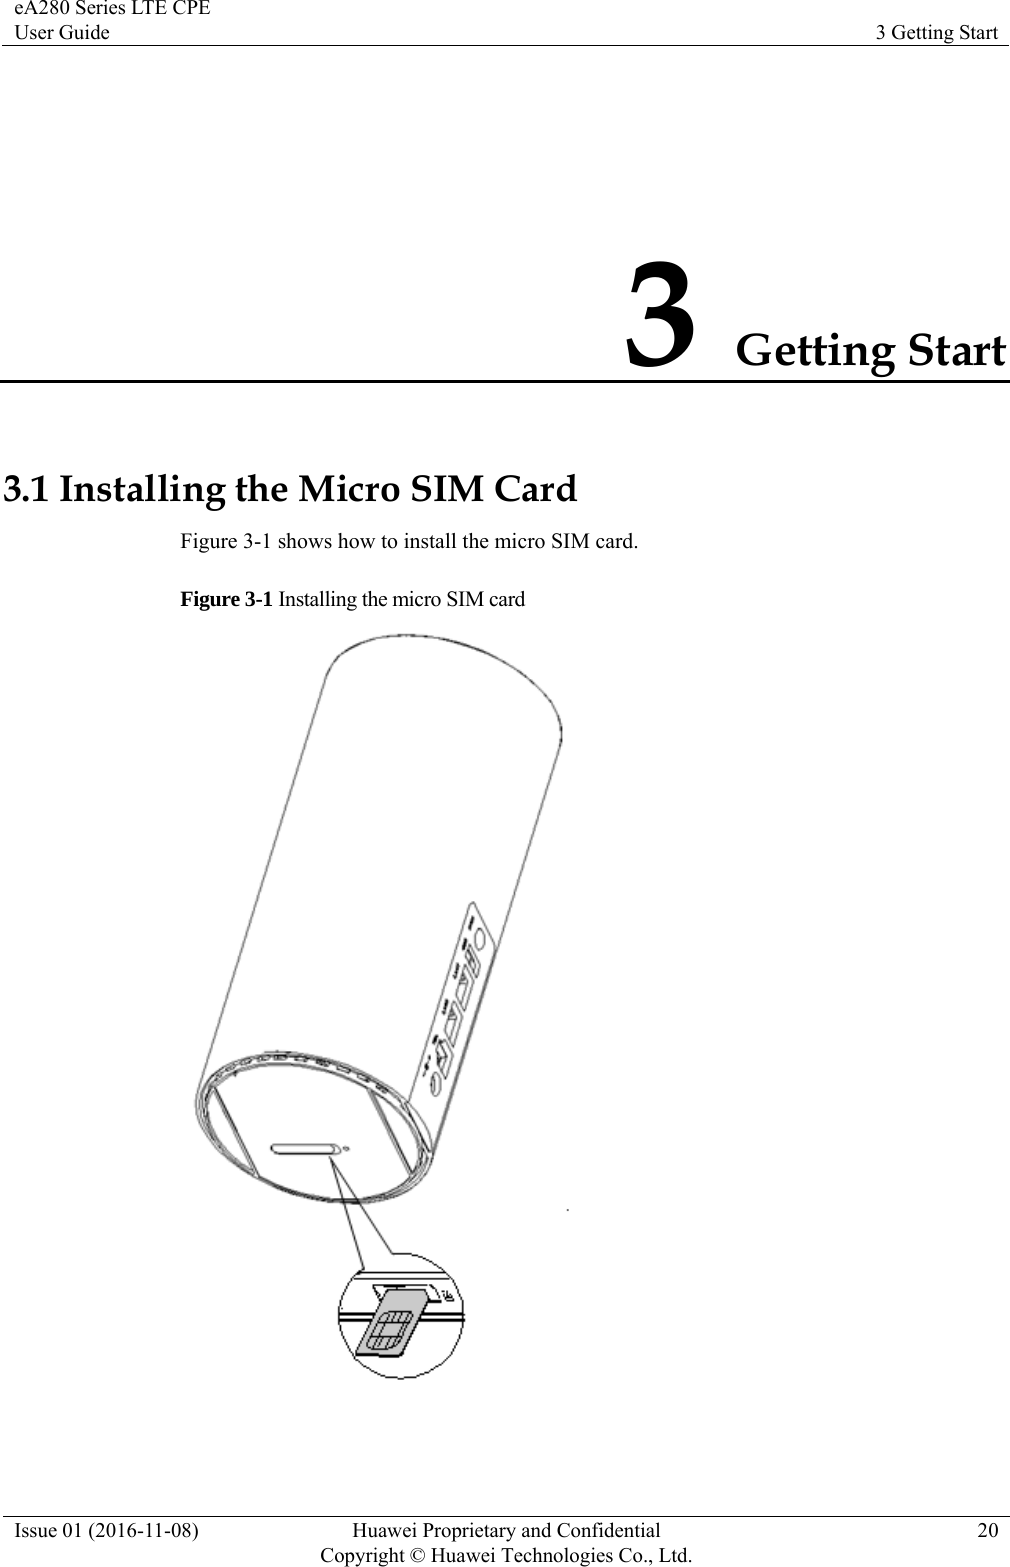 eA280 Series LTE CPE User Guide  3 Getting Start Issue 01 (2016-11-08)  Huawei Proprietary and Confidential         Copyright © Huawei Technologies Co., Ltd.20 3 Getting Start 3.1 Installing the Micro SIM Card Figure 3-1 shows how to install the micro SIM card. Figure 3-1 Installing the micro SIM card   